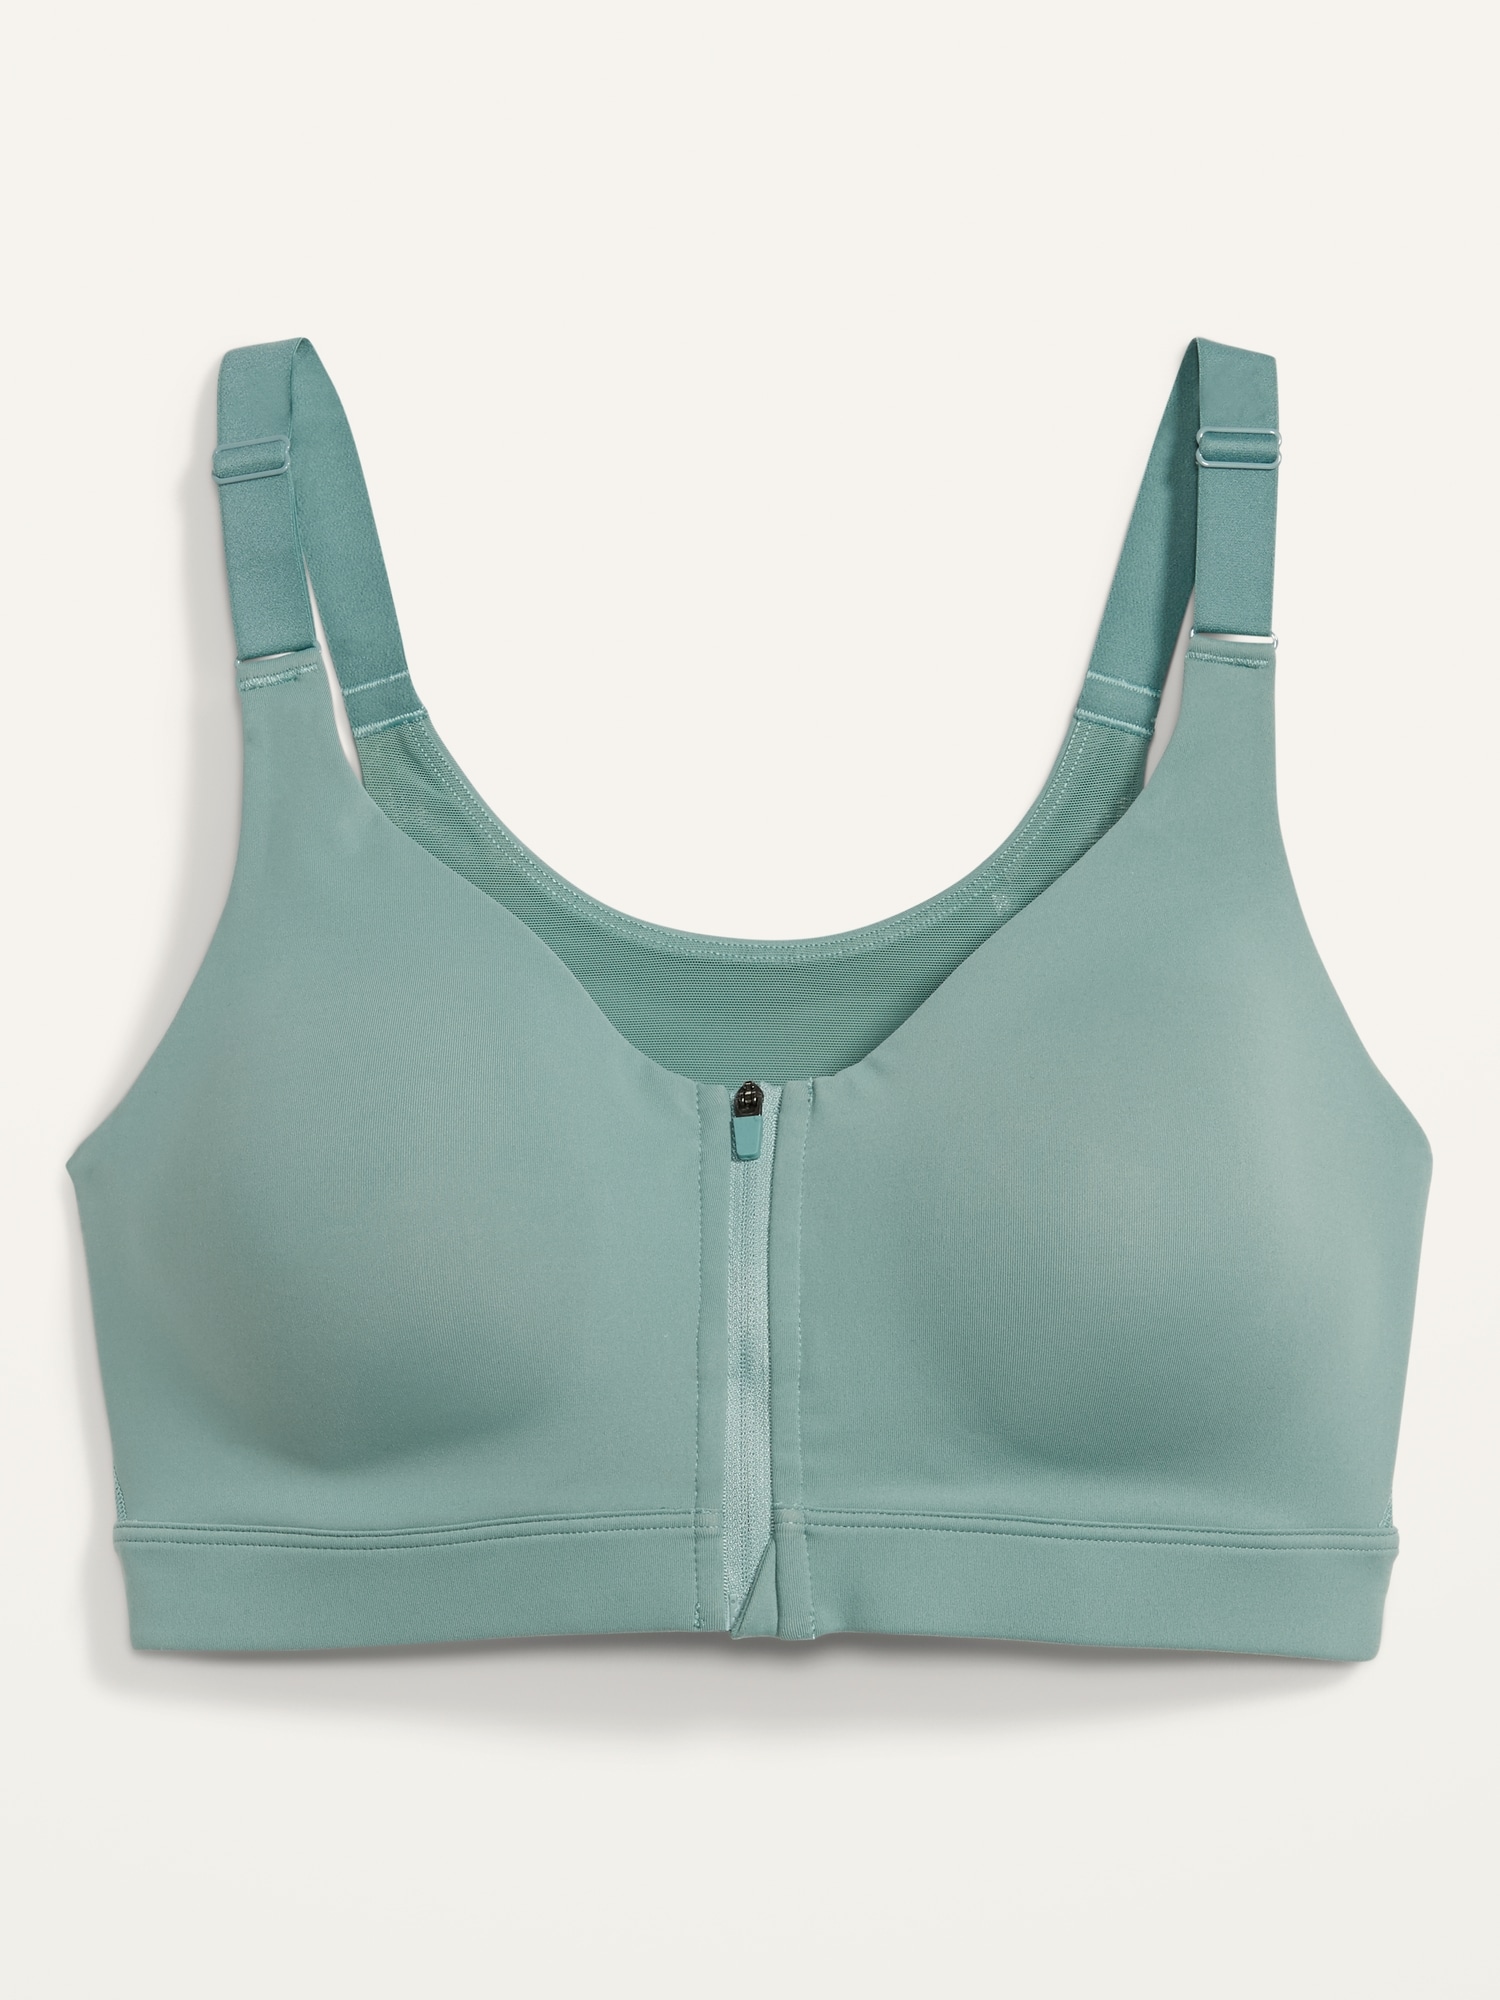 High Support Racerback Sports Bra for Women 32C-42C, Old Navy